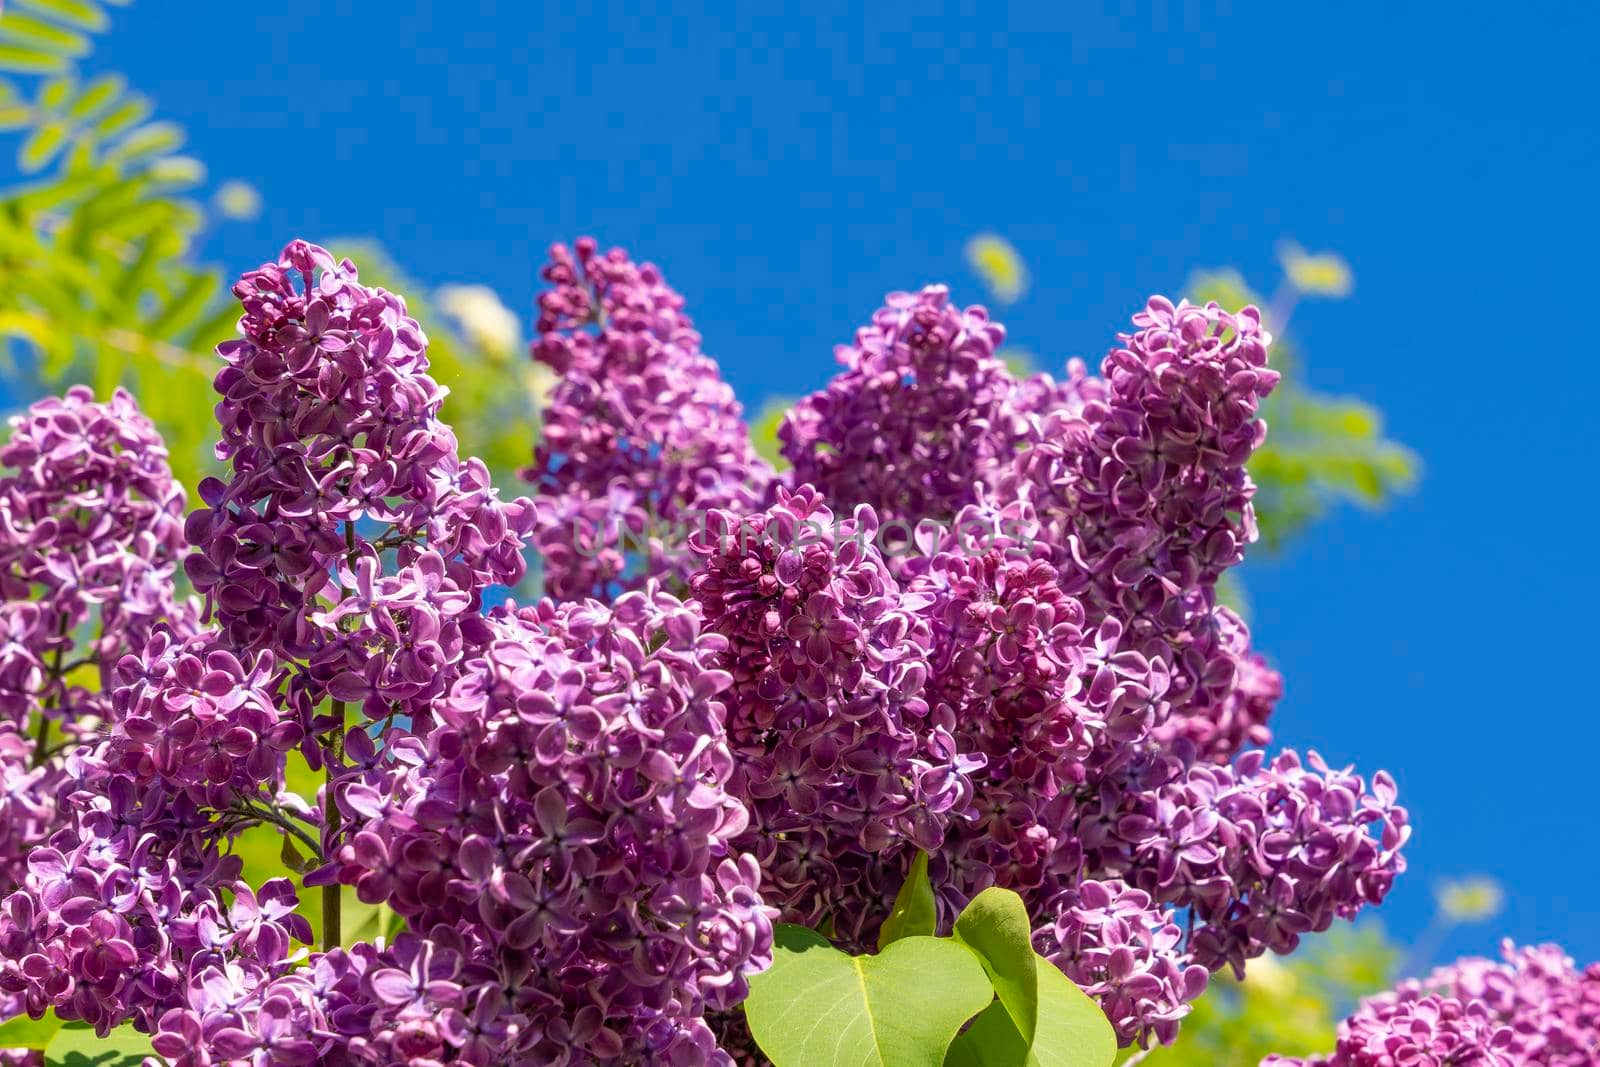 lovely fresh branches of lilac flowers on a background of blue sky and green leaves. natural spring background, soft selective focus. A branch of blooming purple lilac close-up. Beautiful greeting card